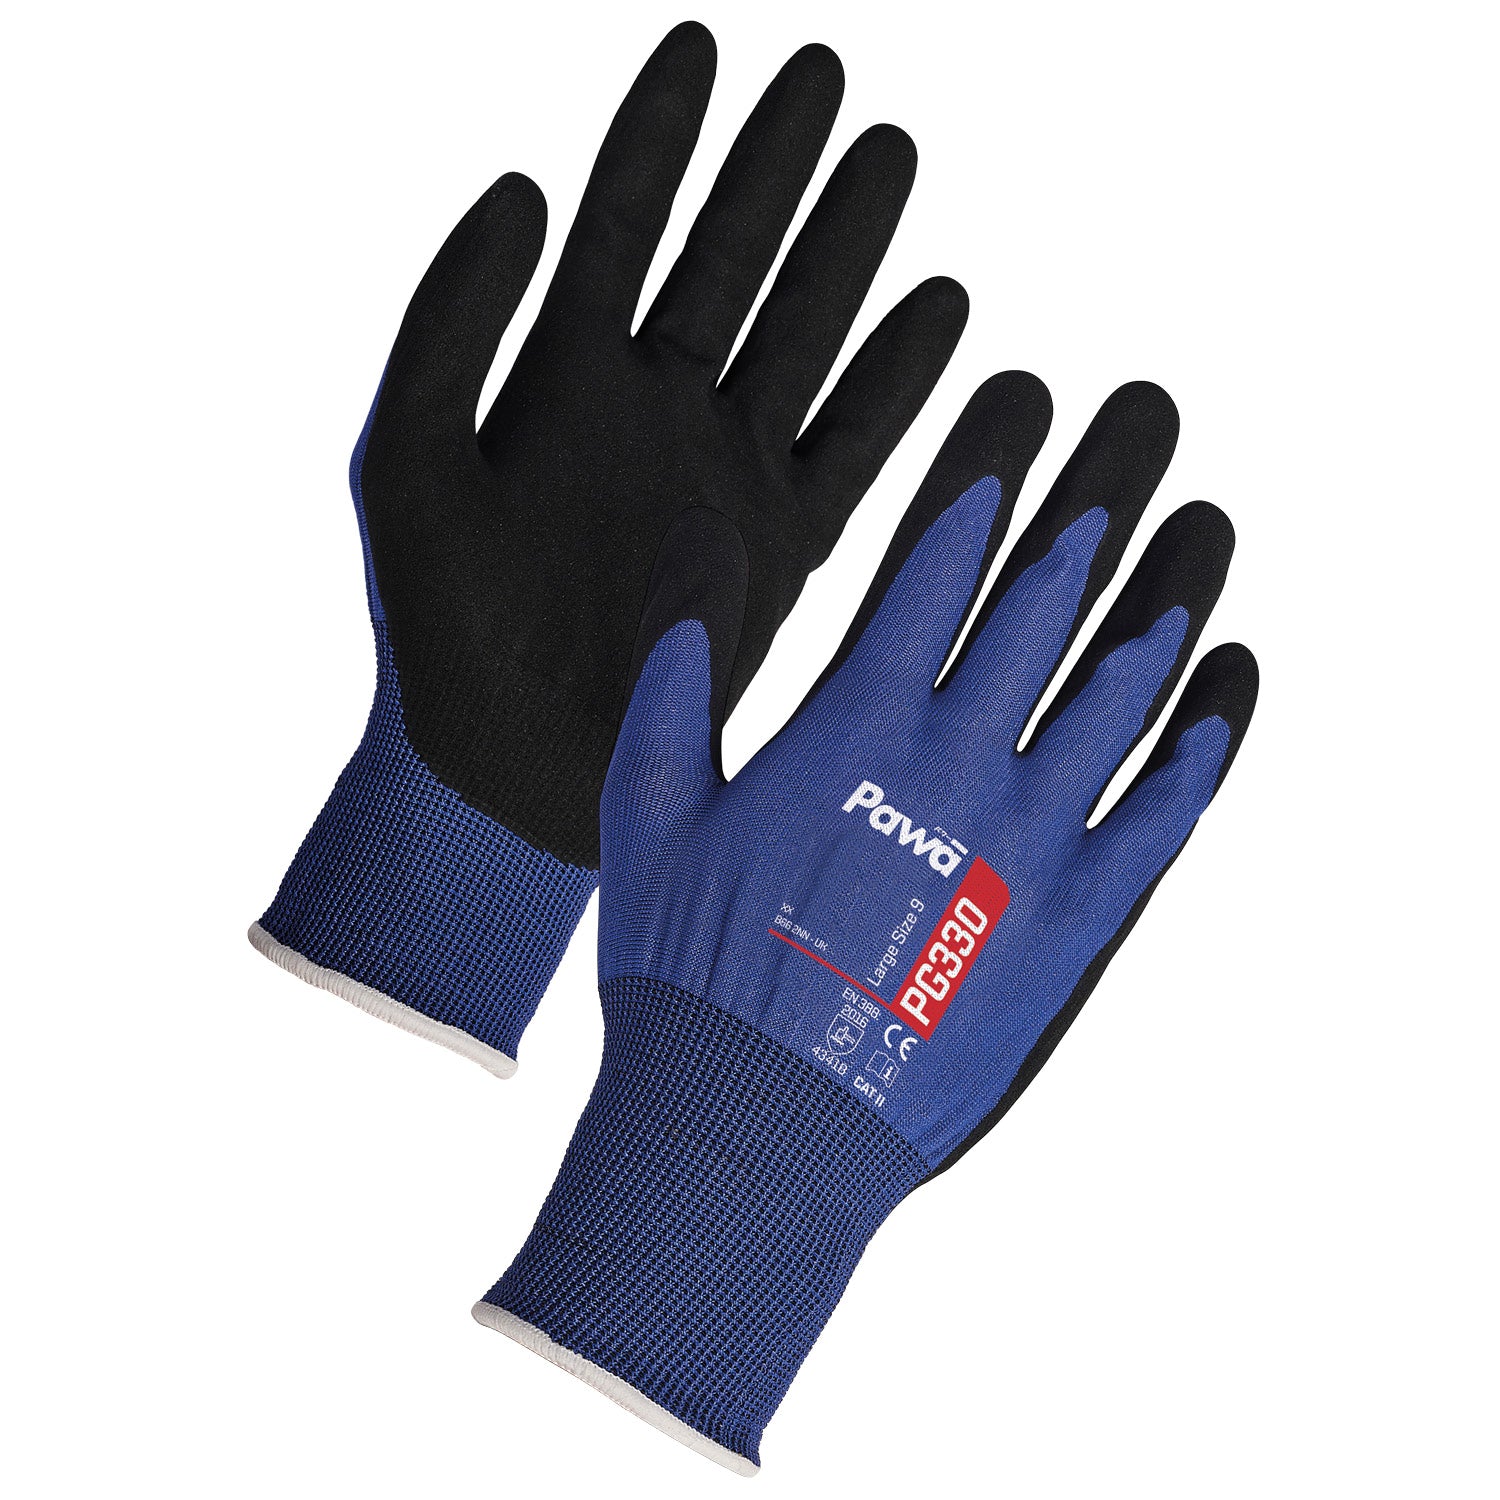 Supertouch Pawa PG330 Gloves